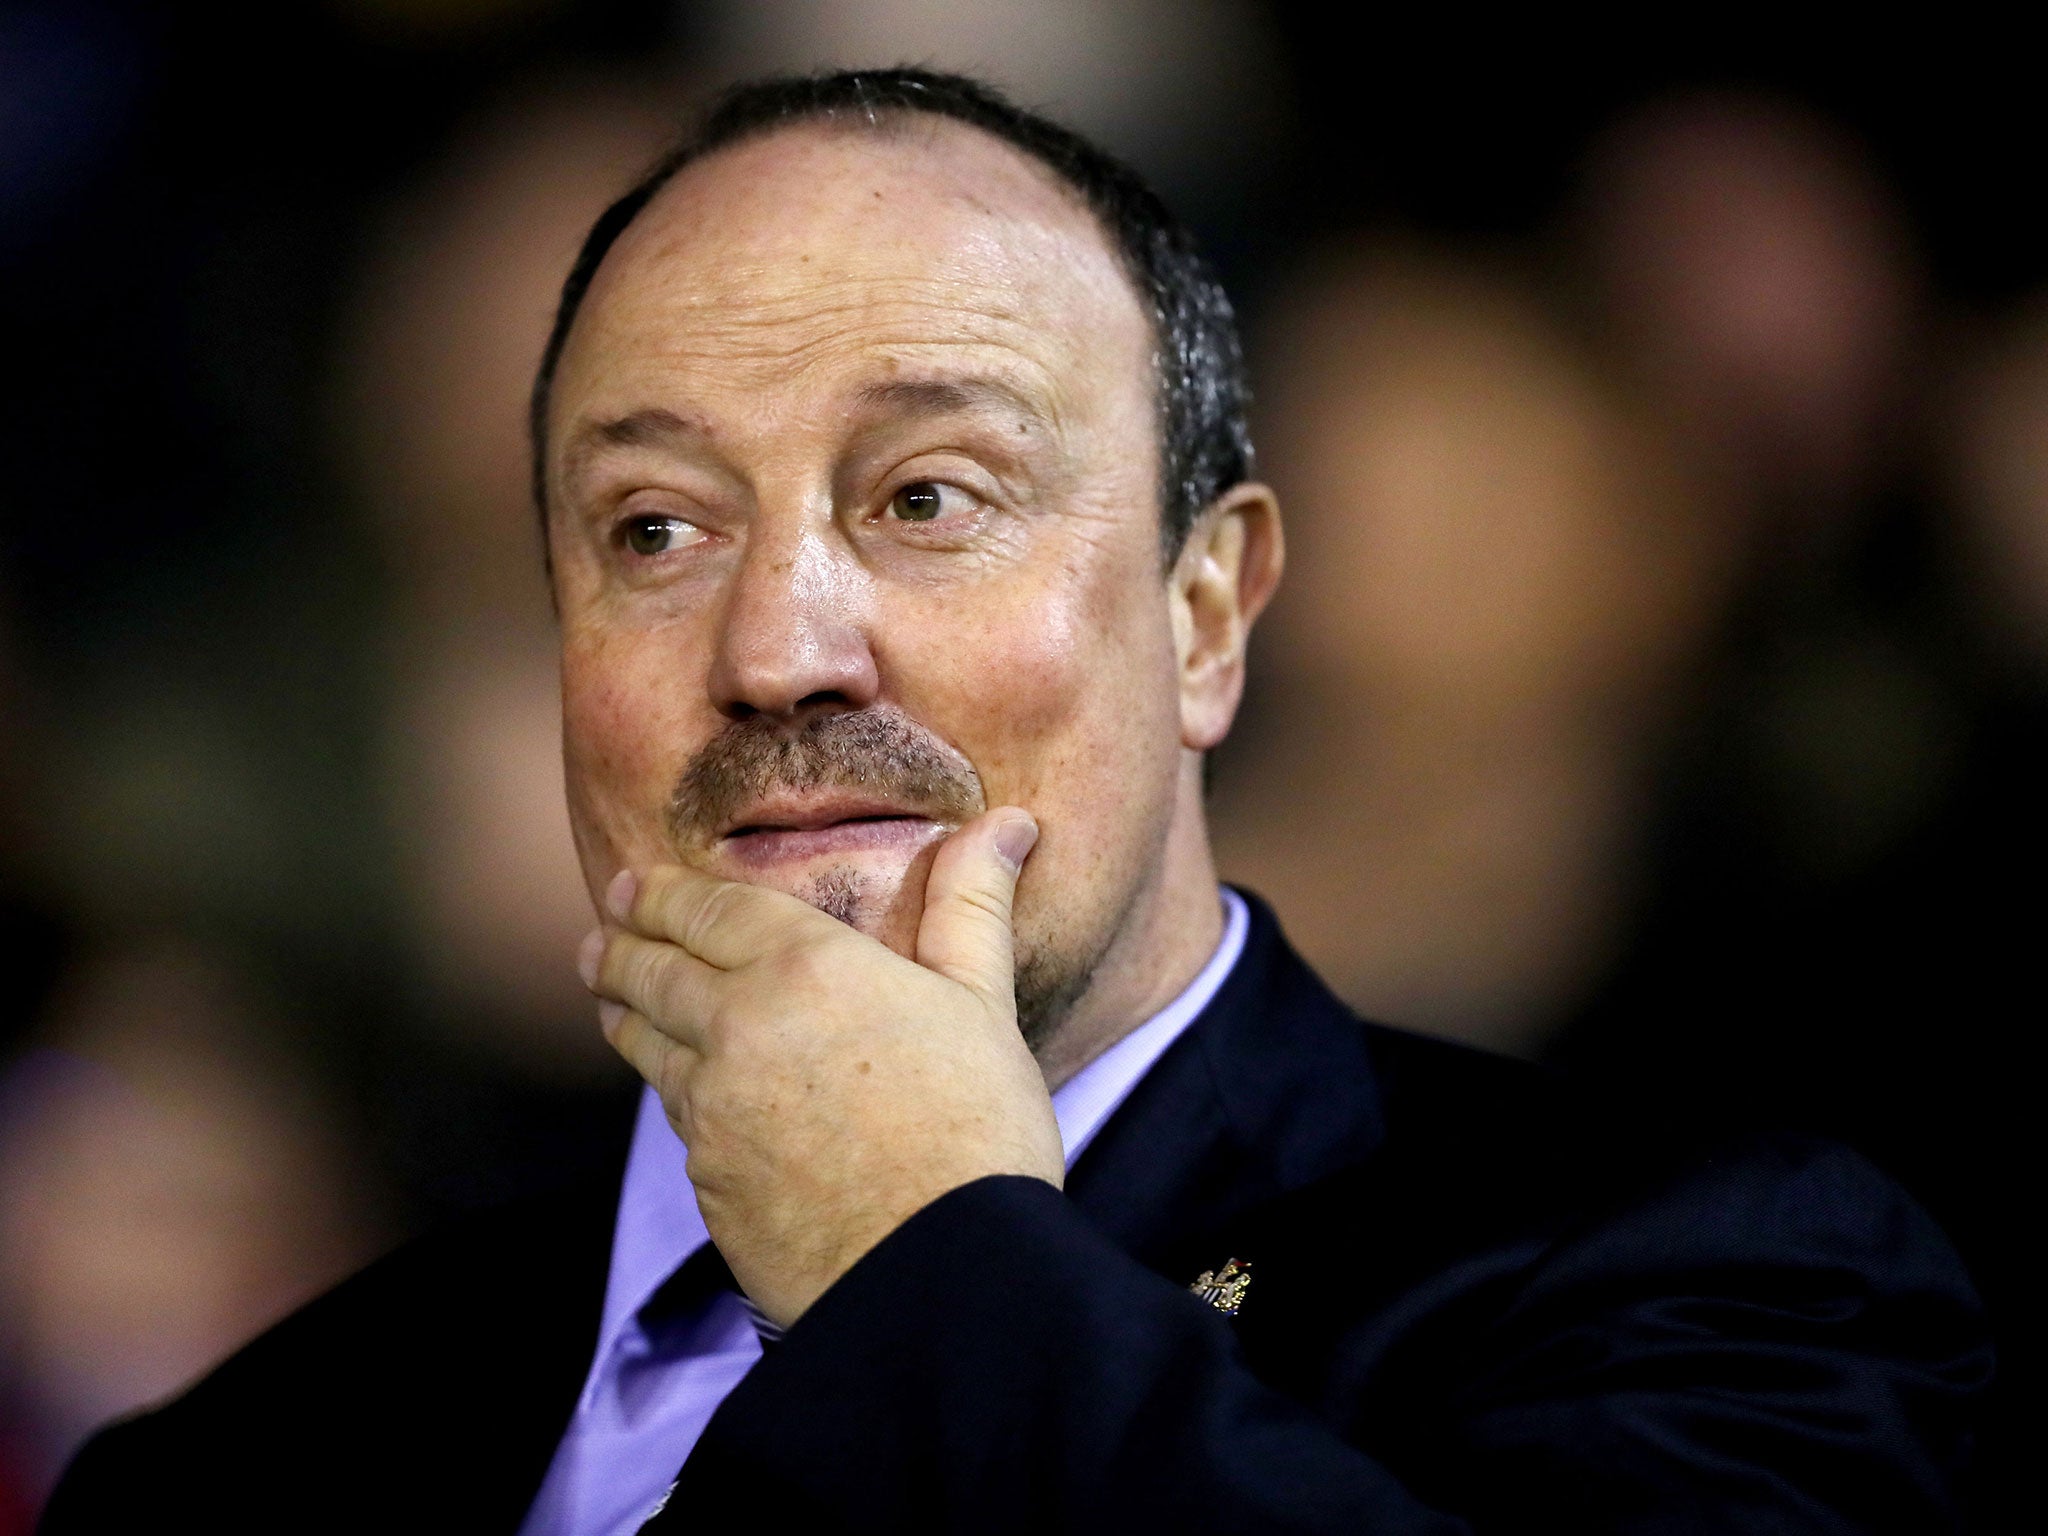 Benitez's side were held to a 2-2 draw at St James' Park